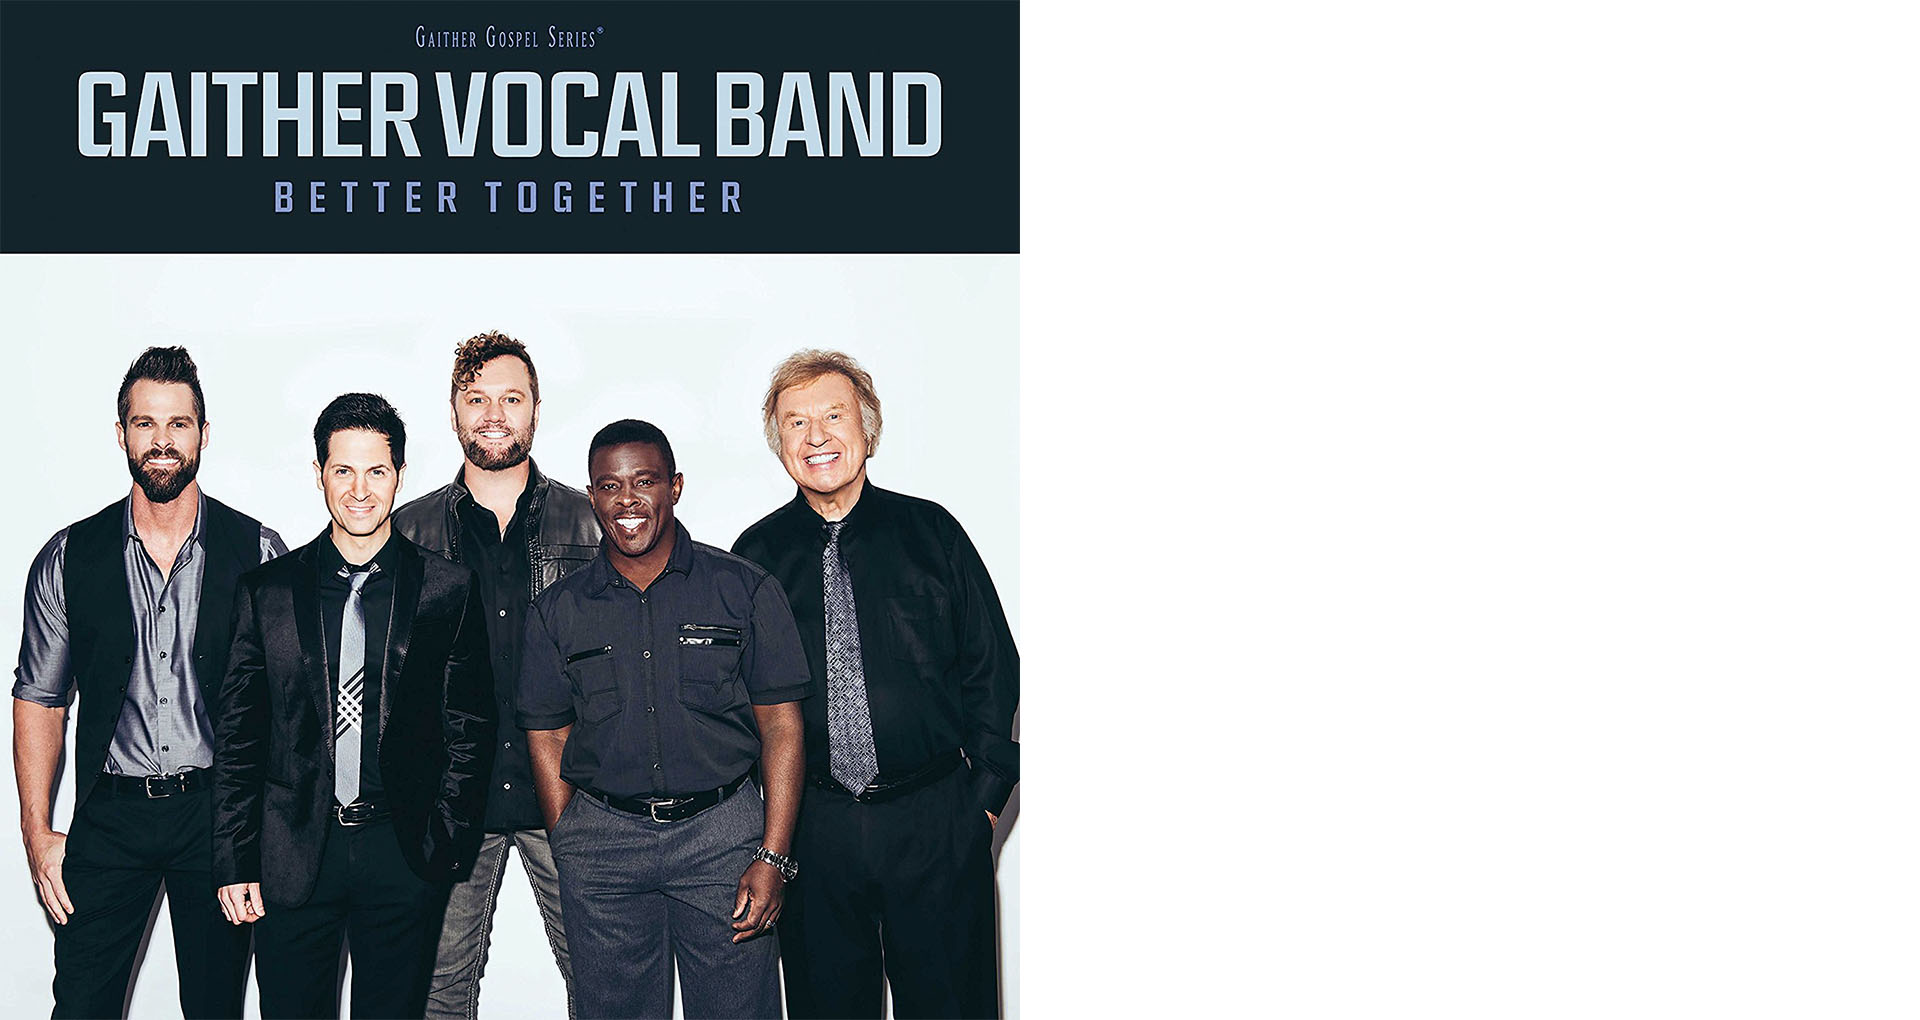 Gaither Vocal Band: „Better Together“, Gaither Music Group/Gerth Medien, 18,99 Euro, EAN 0617884921828